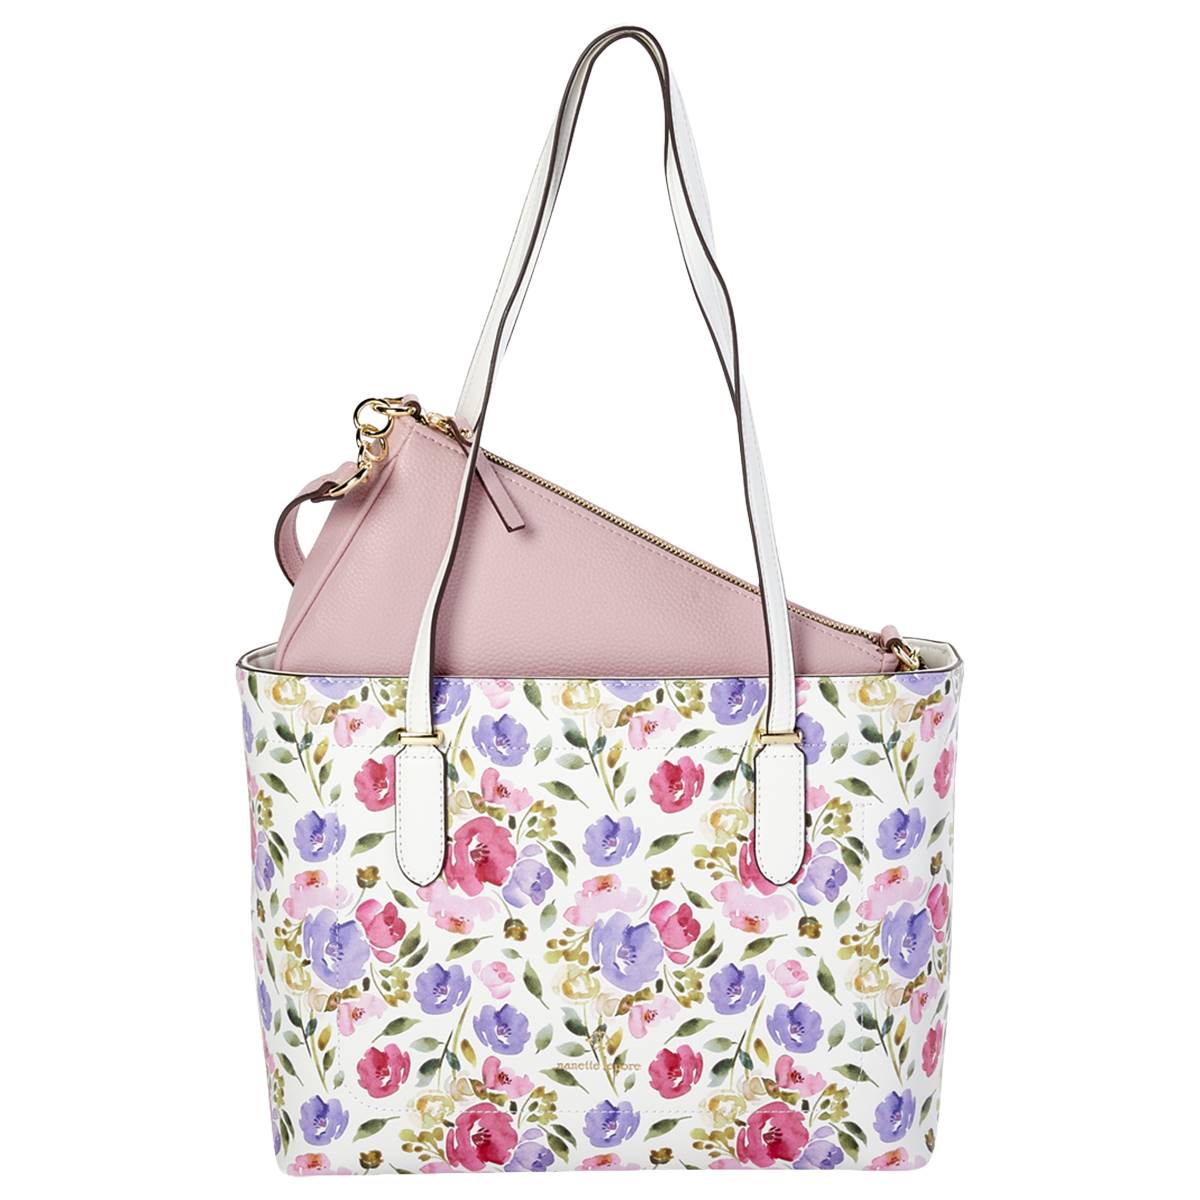 Nanette Lepore Anderson Pink Floral Tote With Solid Bag In A Bag